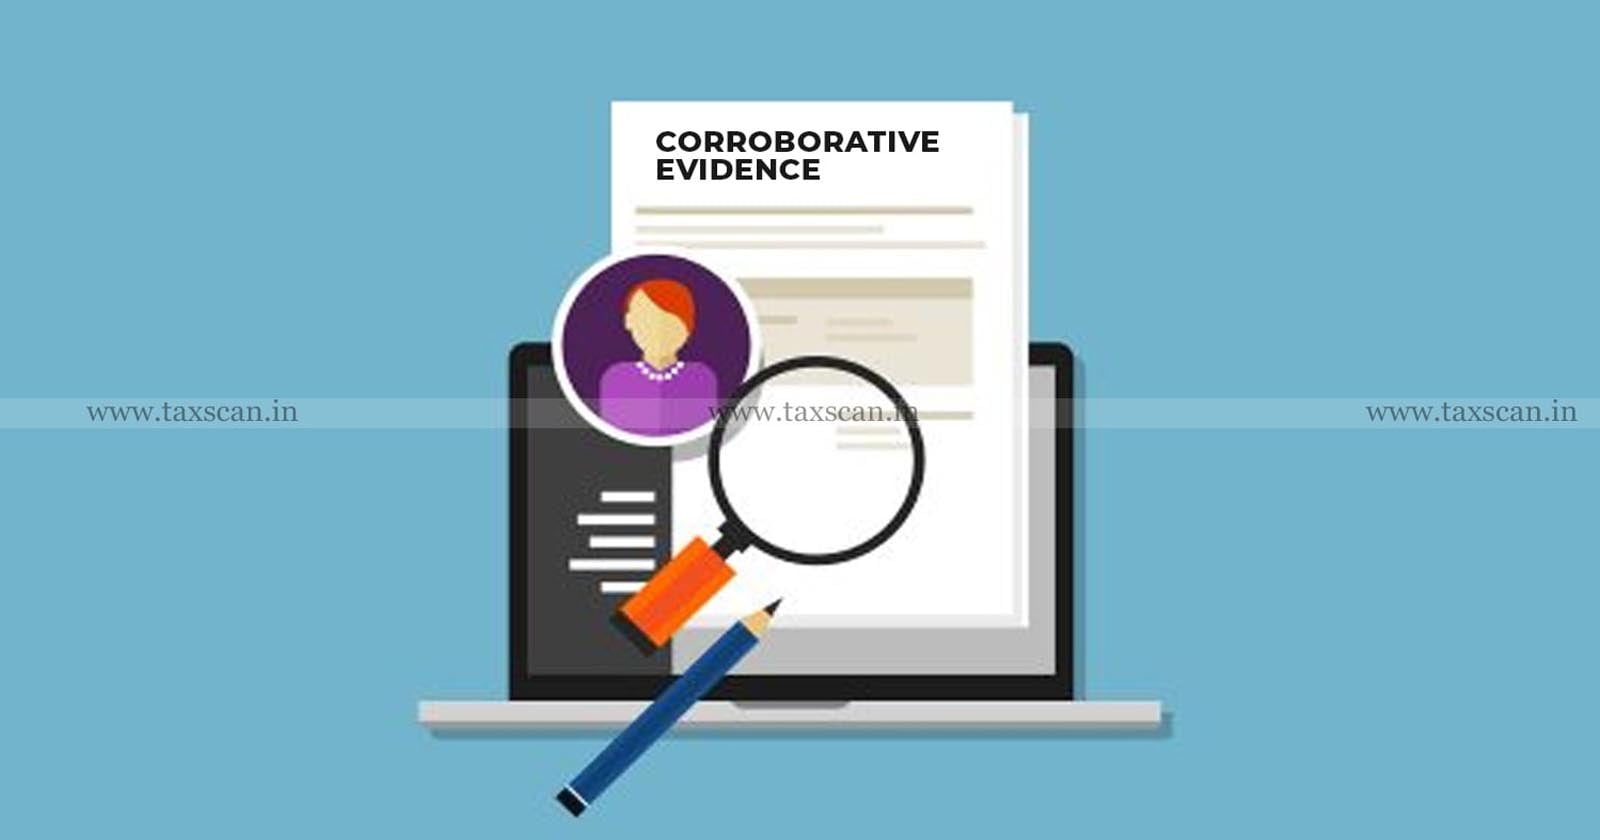 Absence of Corroborative and Supporting Evidence - survey of Third Party Business Premises -ITAT - taxscan